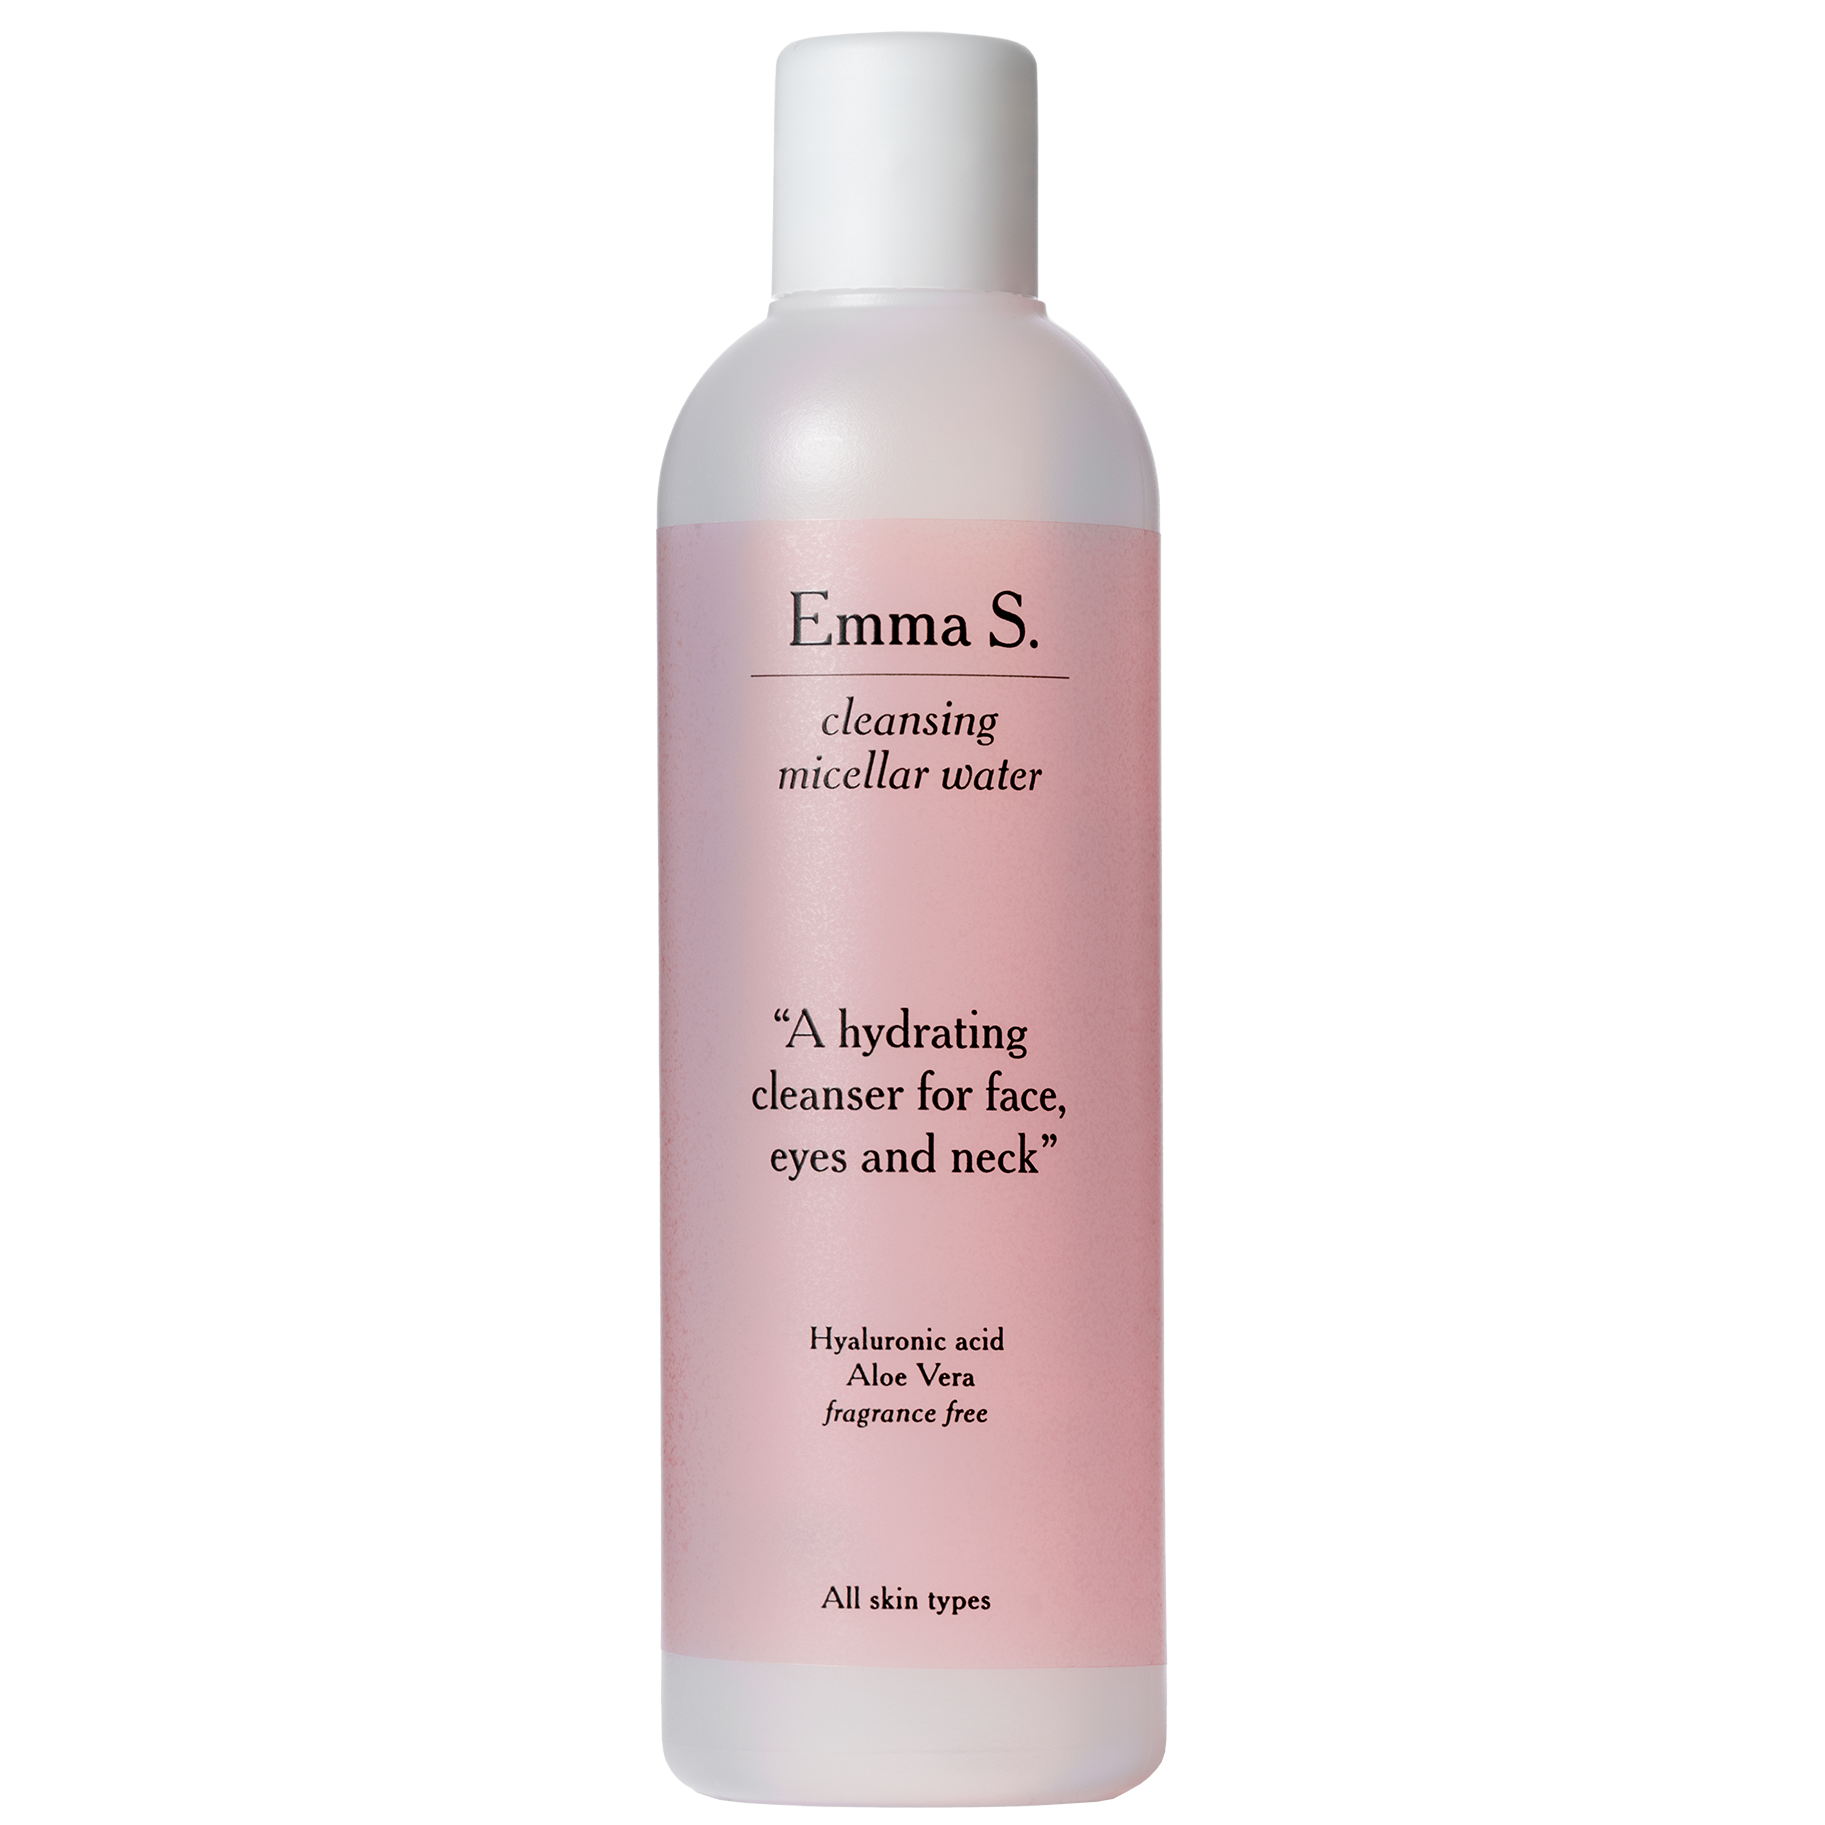 Emma S. Cleansing Micellar Water